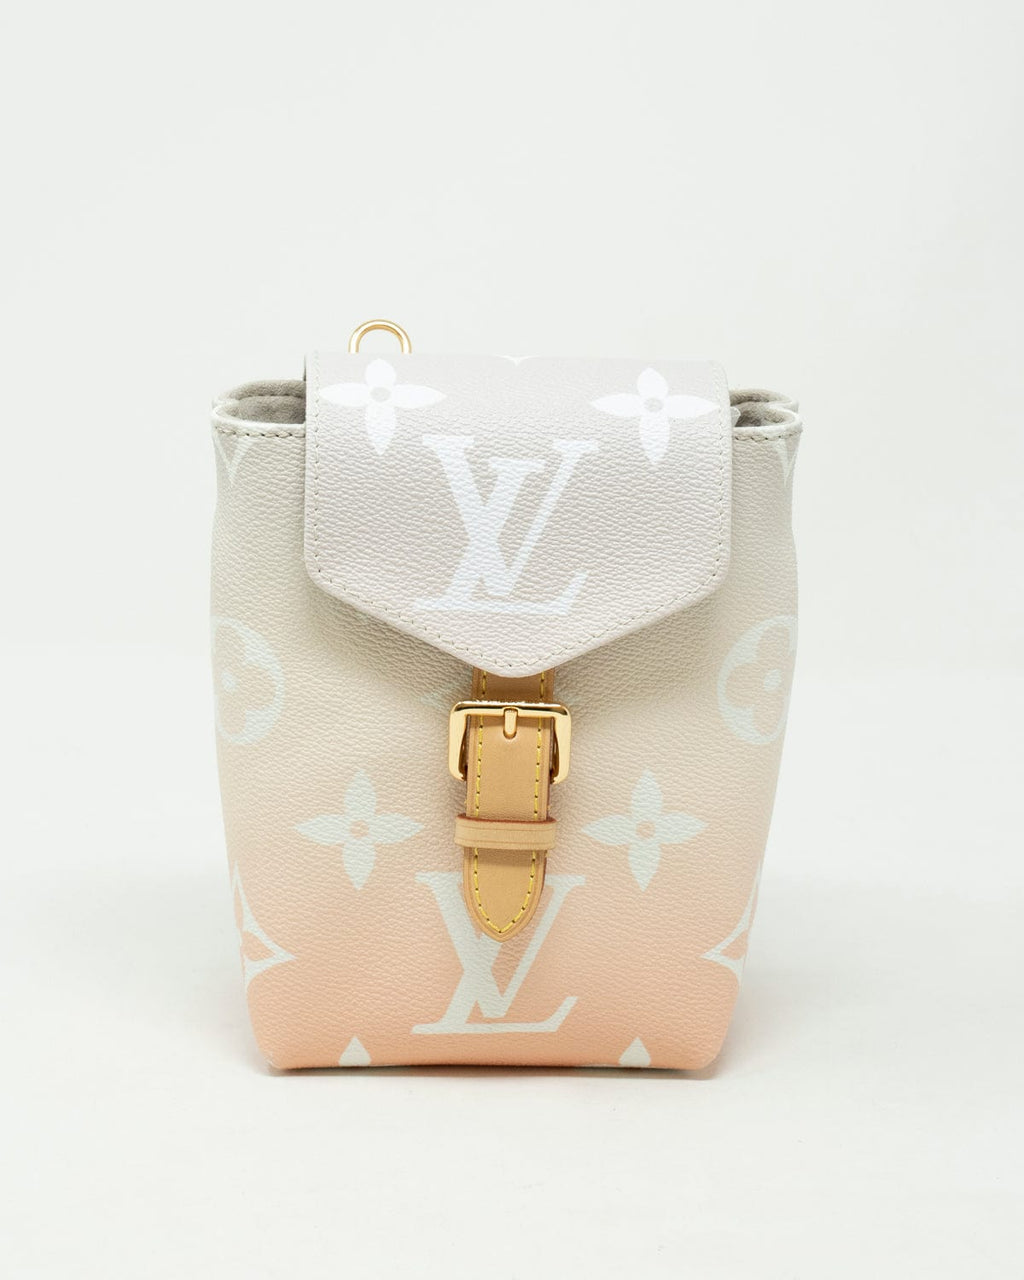 Shop Louis Vuitton 2022 SS Tiny Backpack (M80596) by Corriere